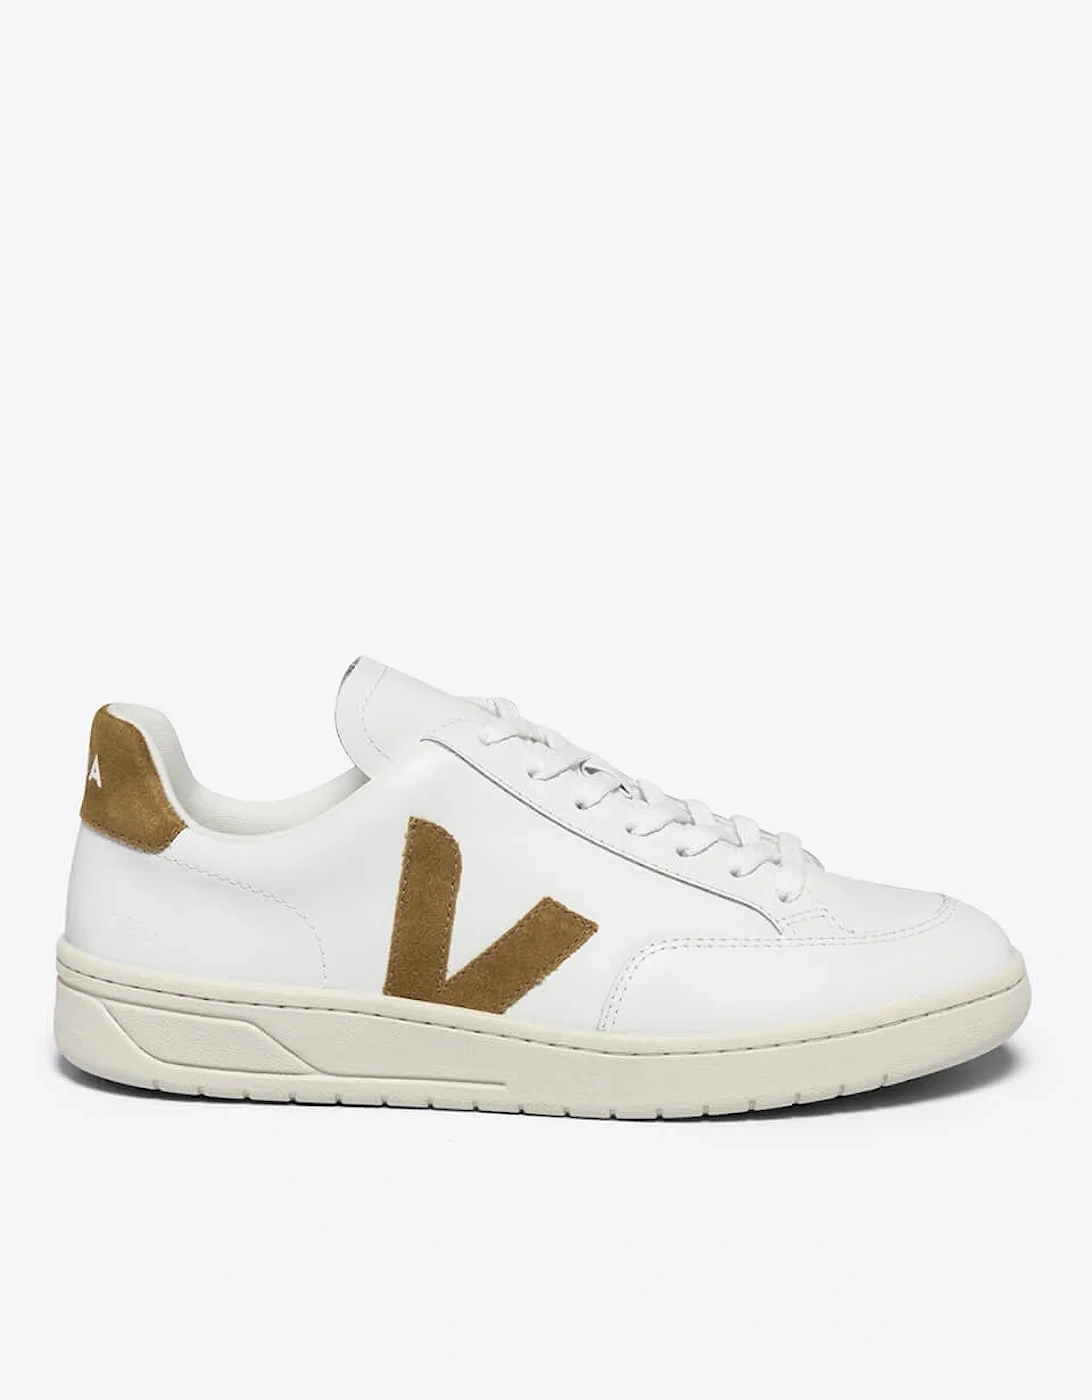 Women's V-12 Logo-Appliquéd Leather and Suede Trainers - - Home - Women's V-12 Logo-Appliquéd Leather and Suede Trainers